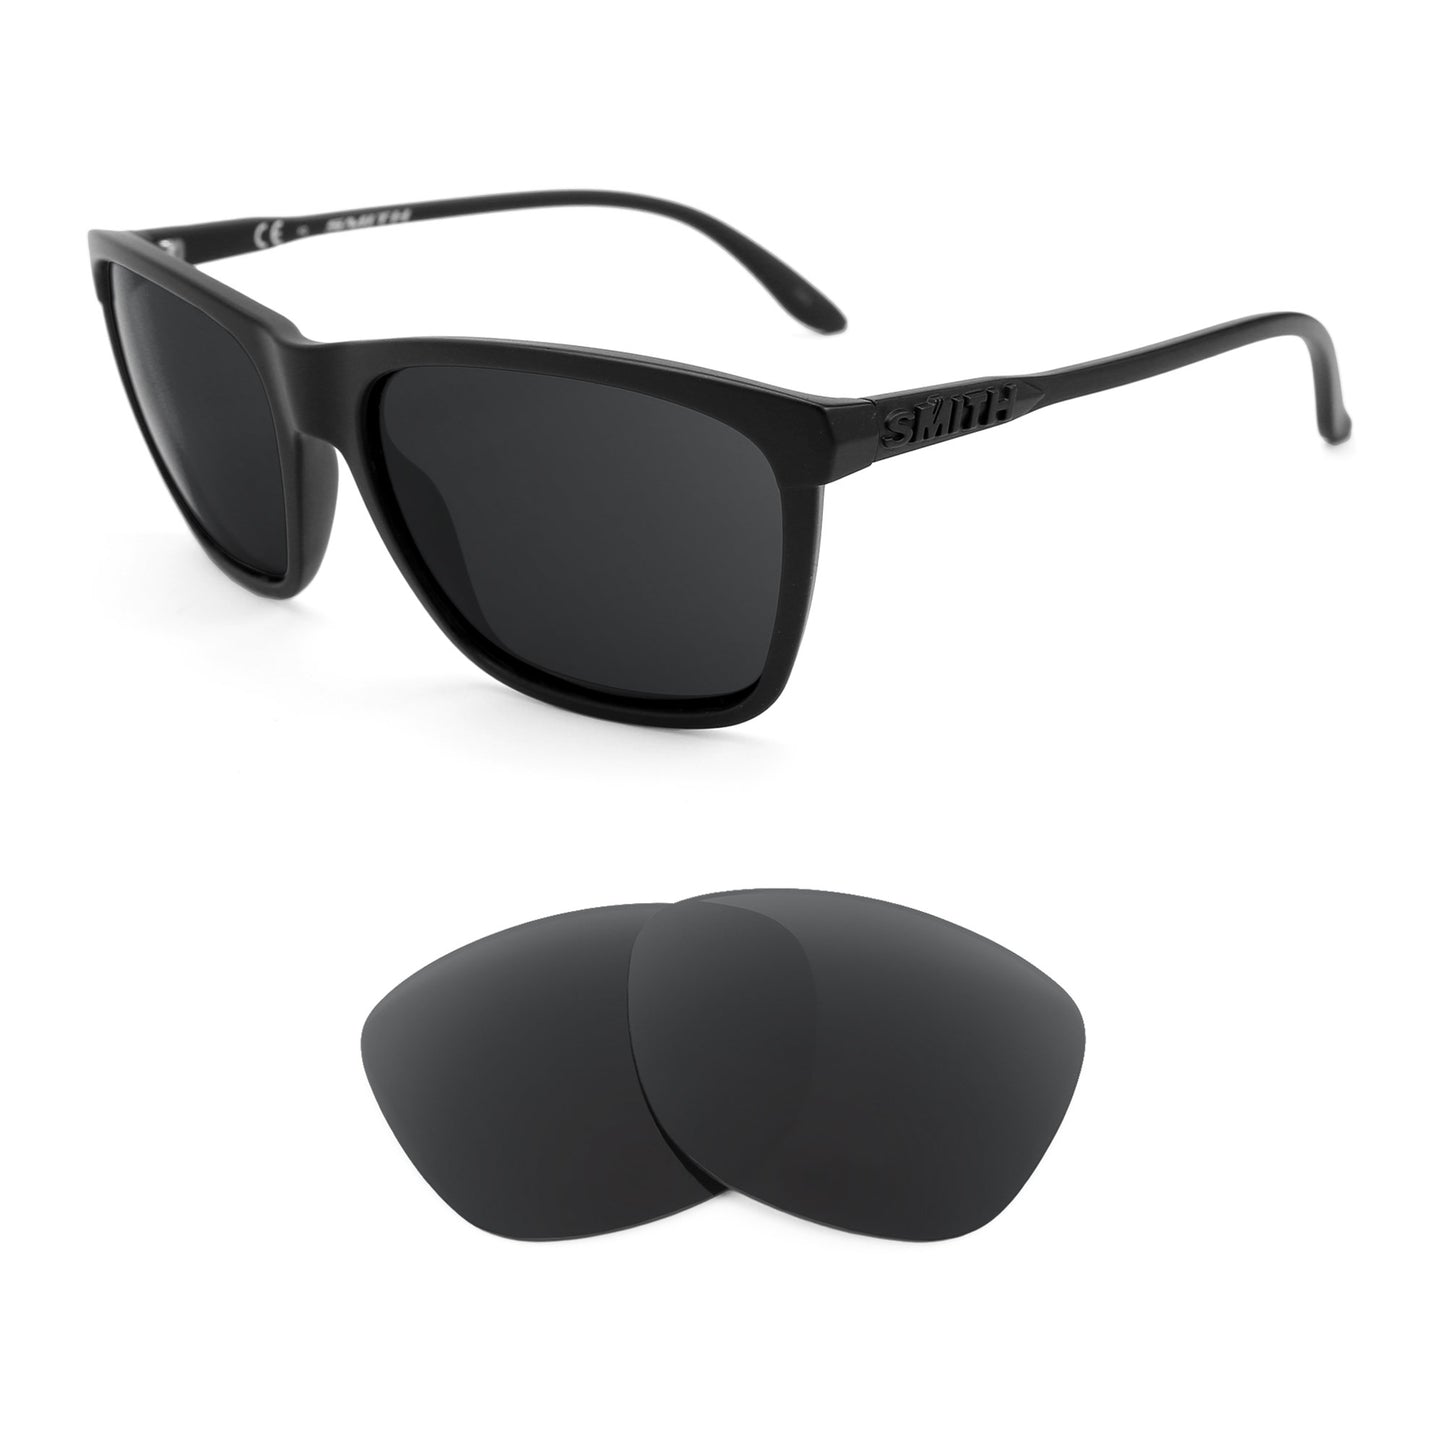 Smith Delano sunglasses with replacement lenses